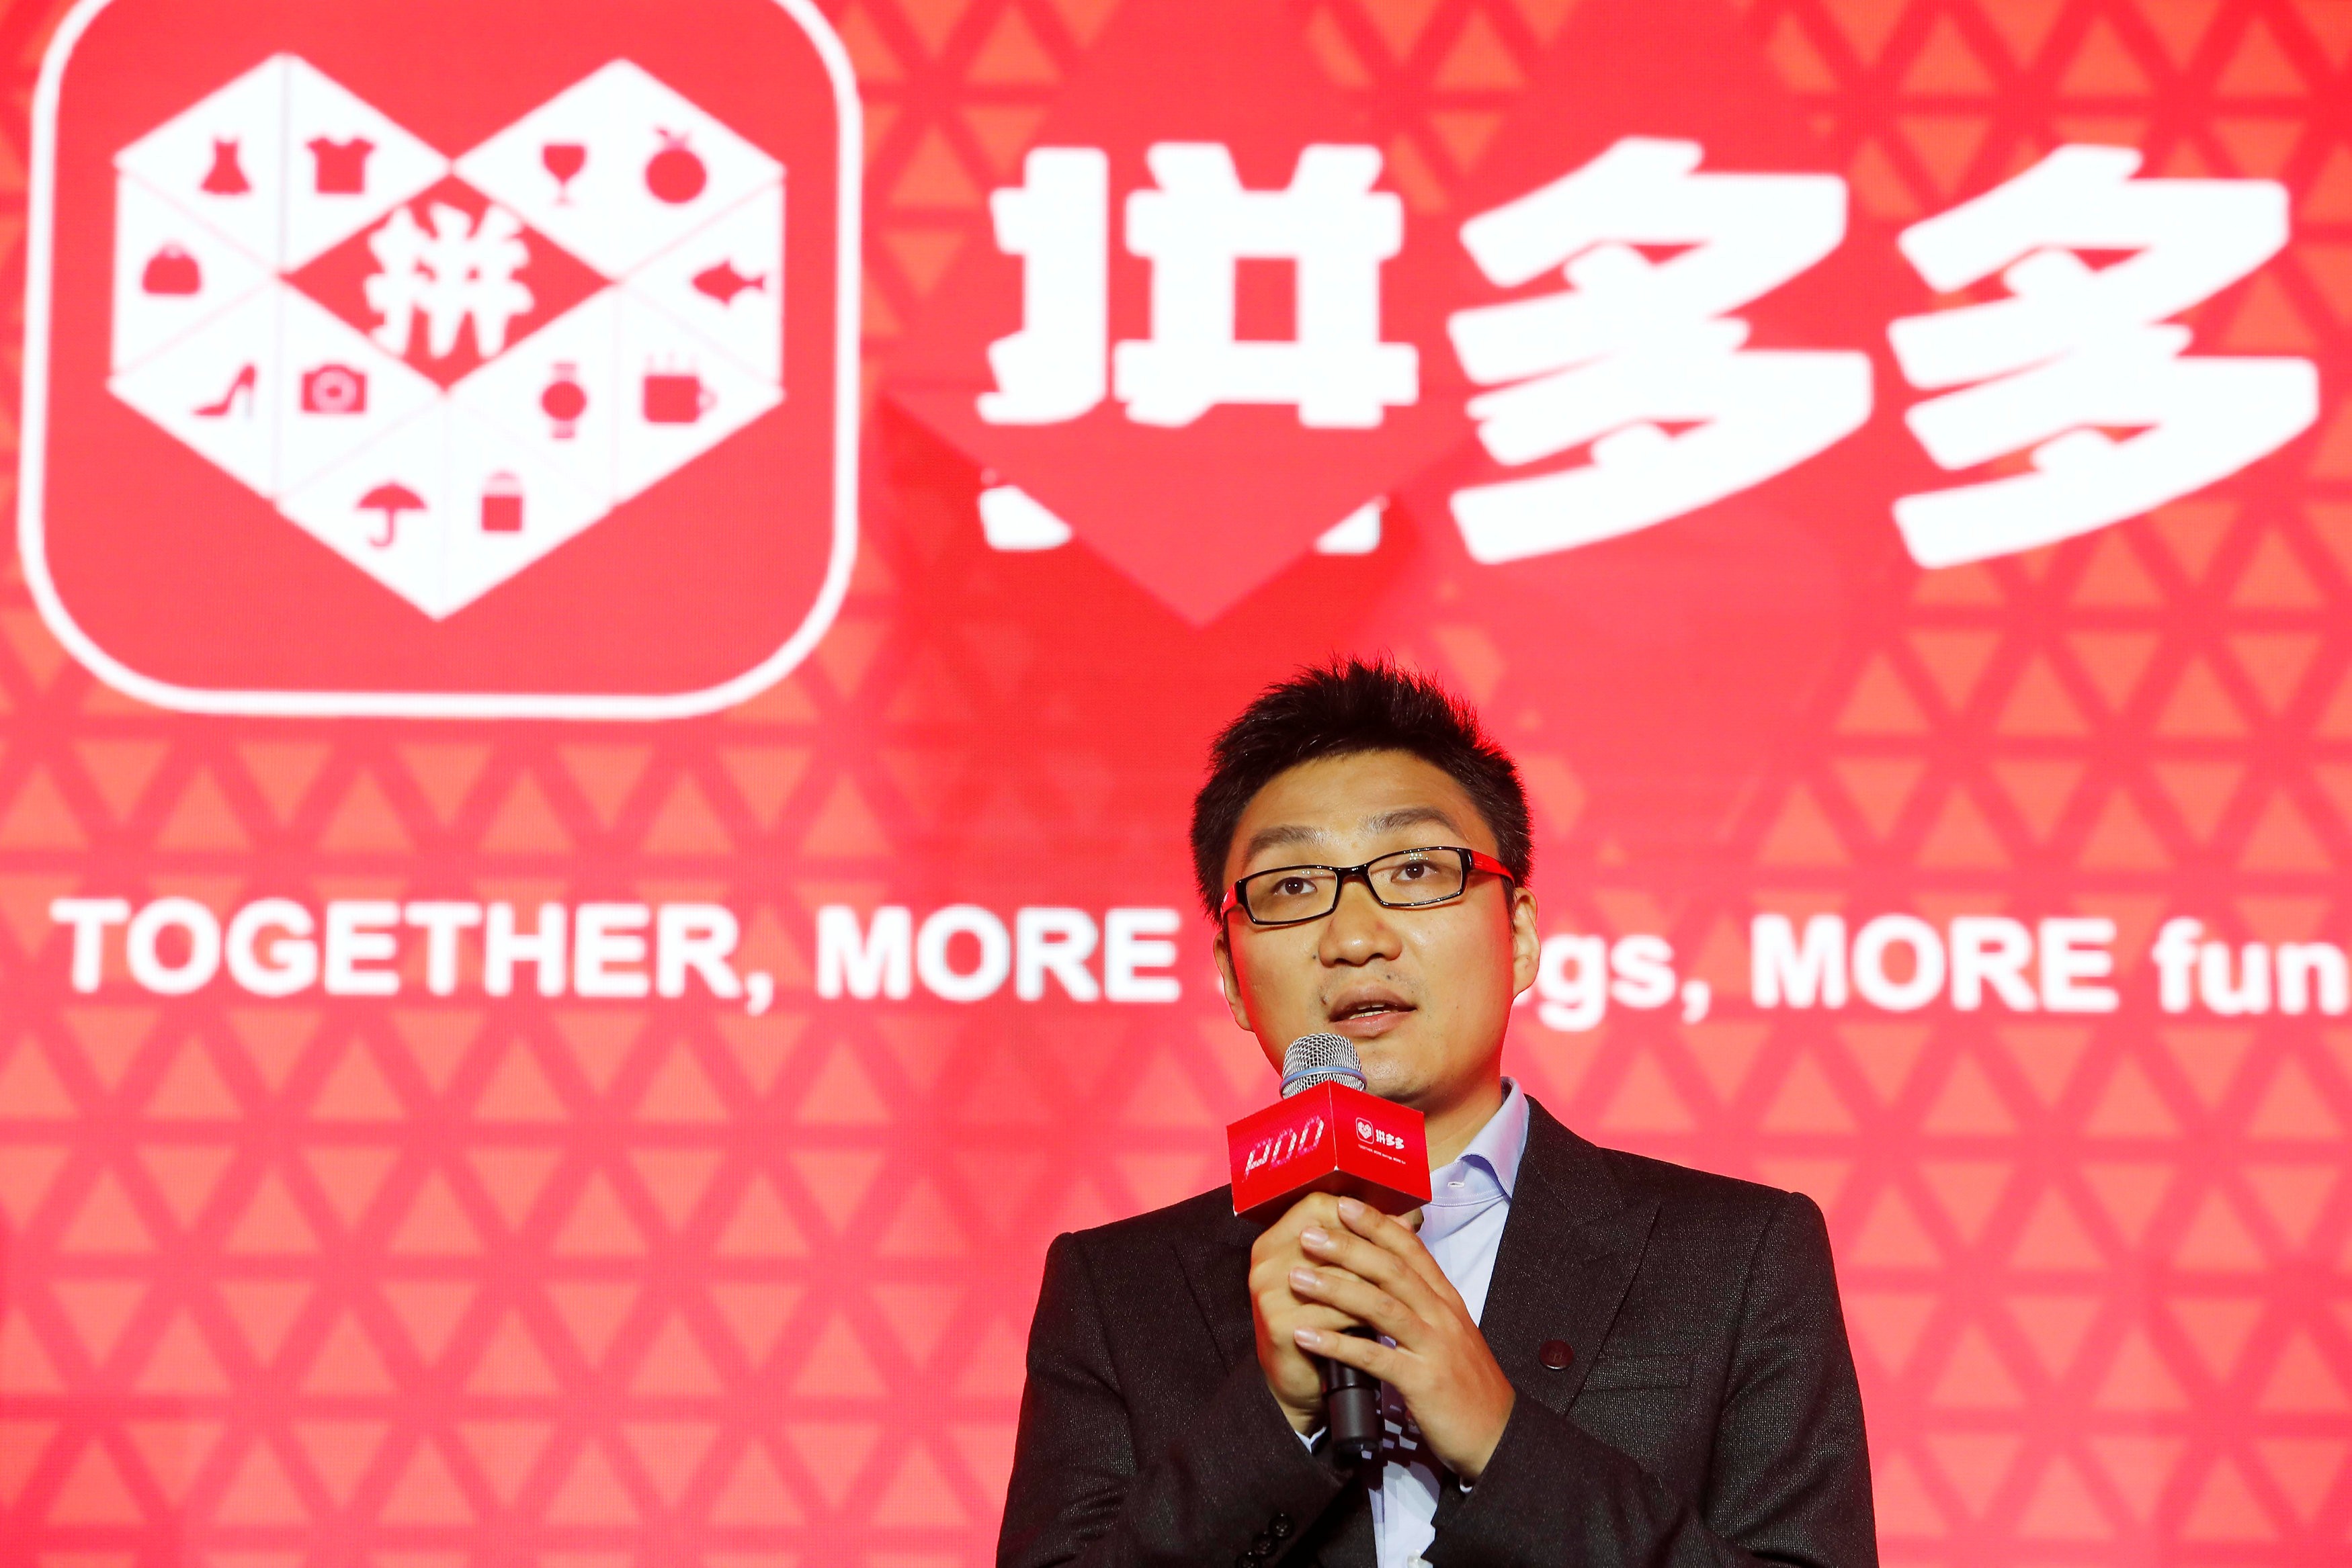 Colin Huang, founder and CEO of the online group discounter Pinduoduo, speaks during the company's stock trading debut at the Nasdaq Stock Market in New York, during an event in Shanghai, China July 26, 2018. Photo: Reuters